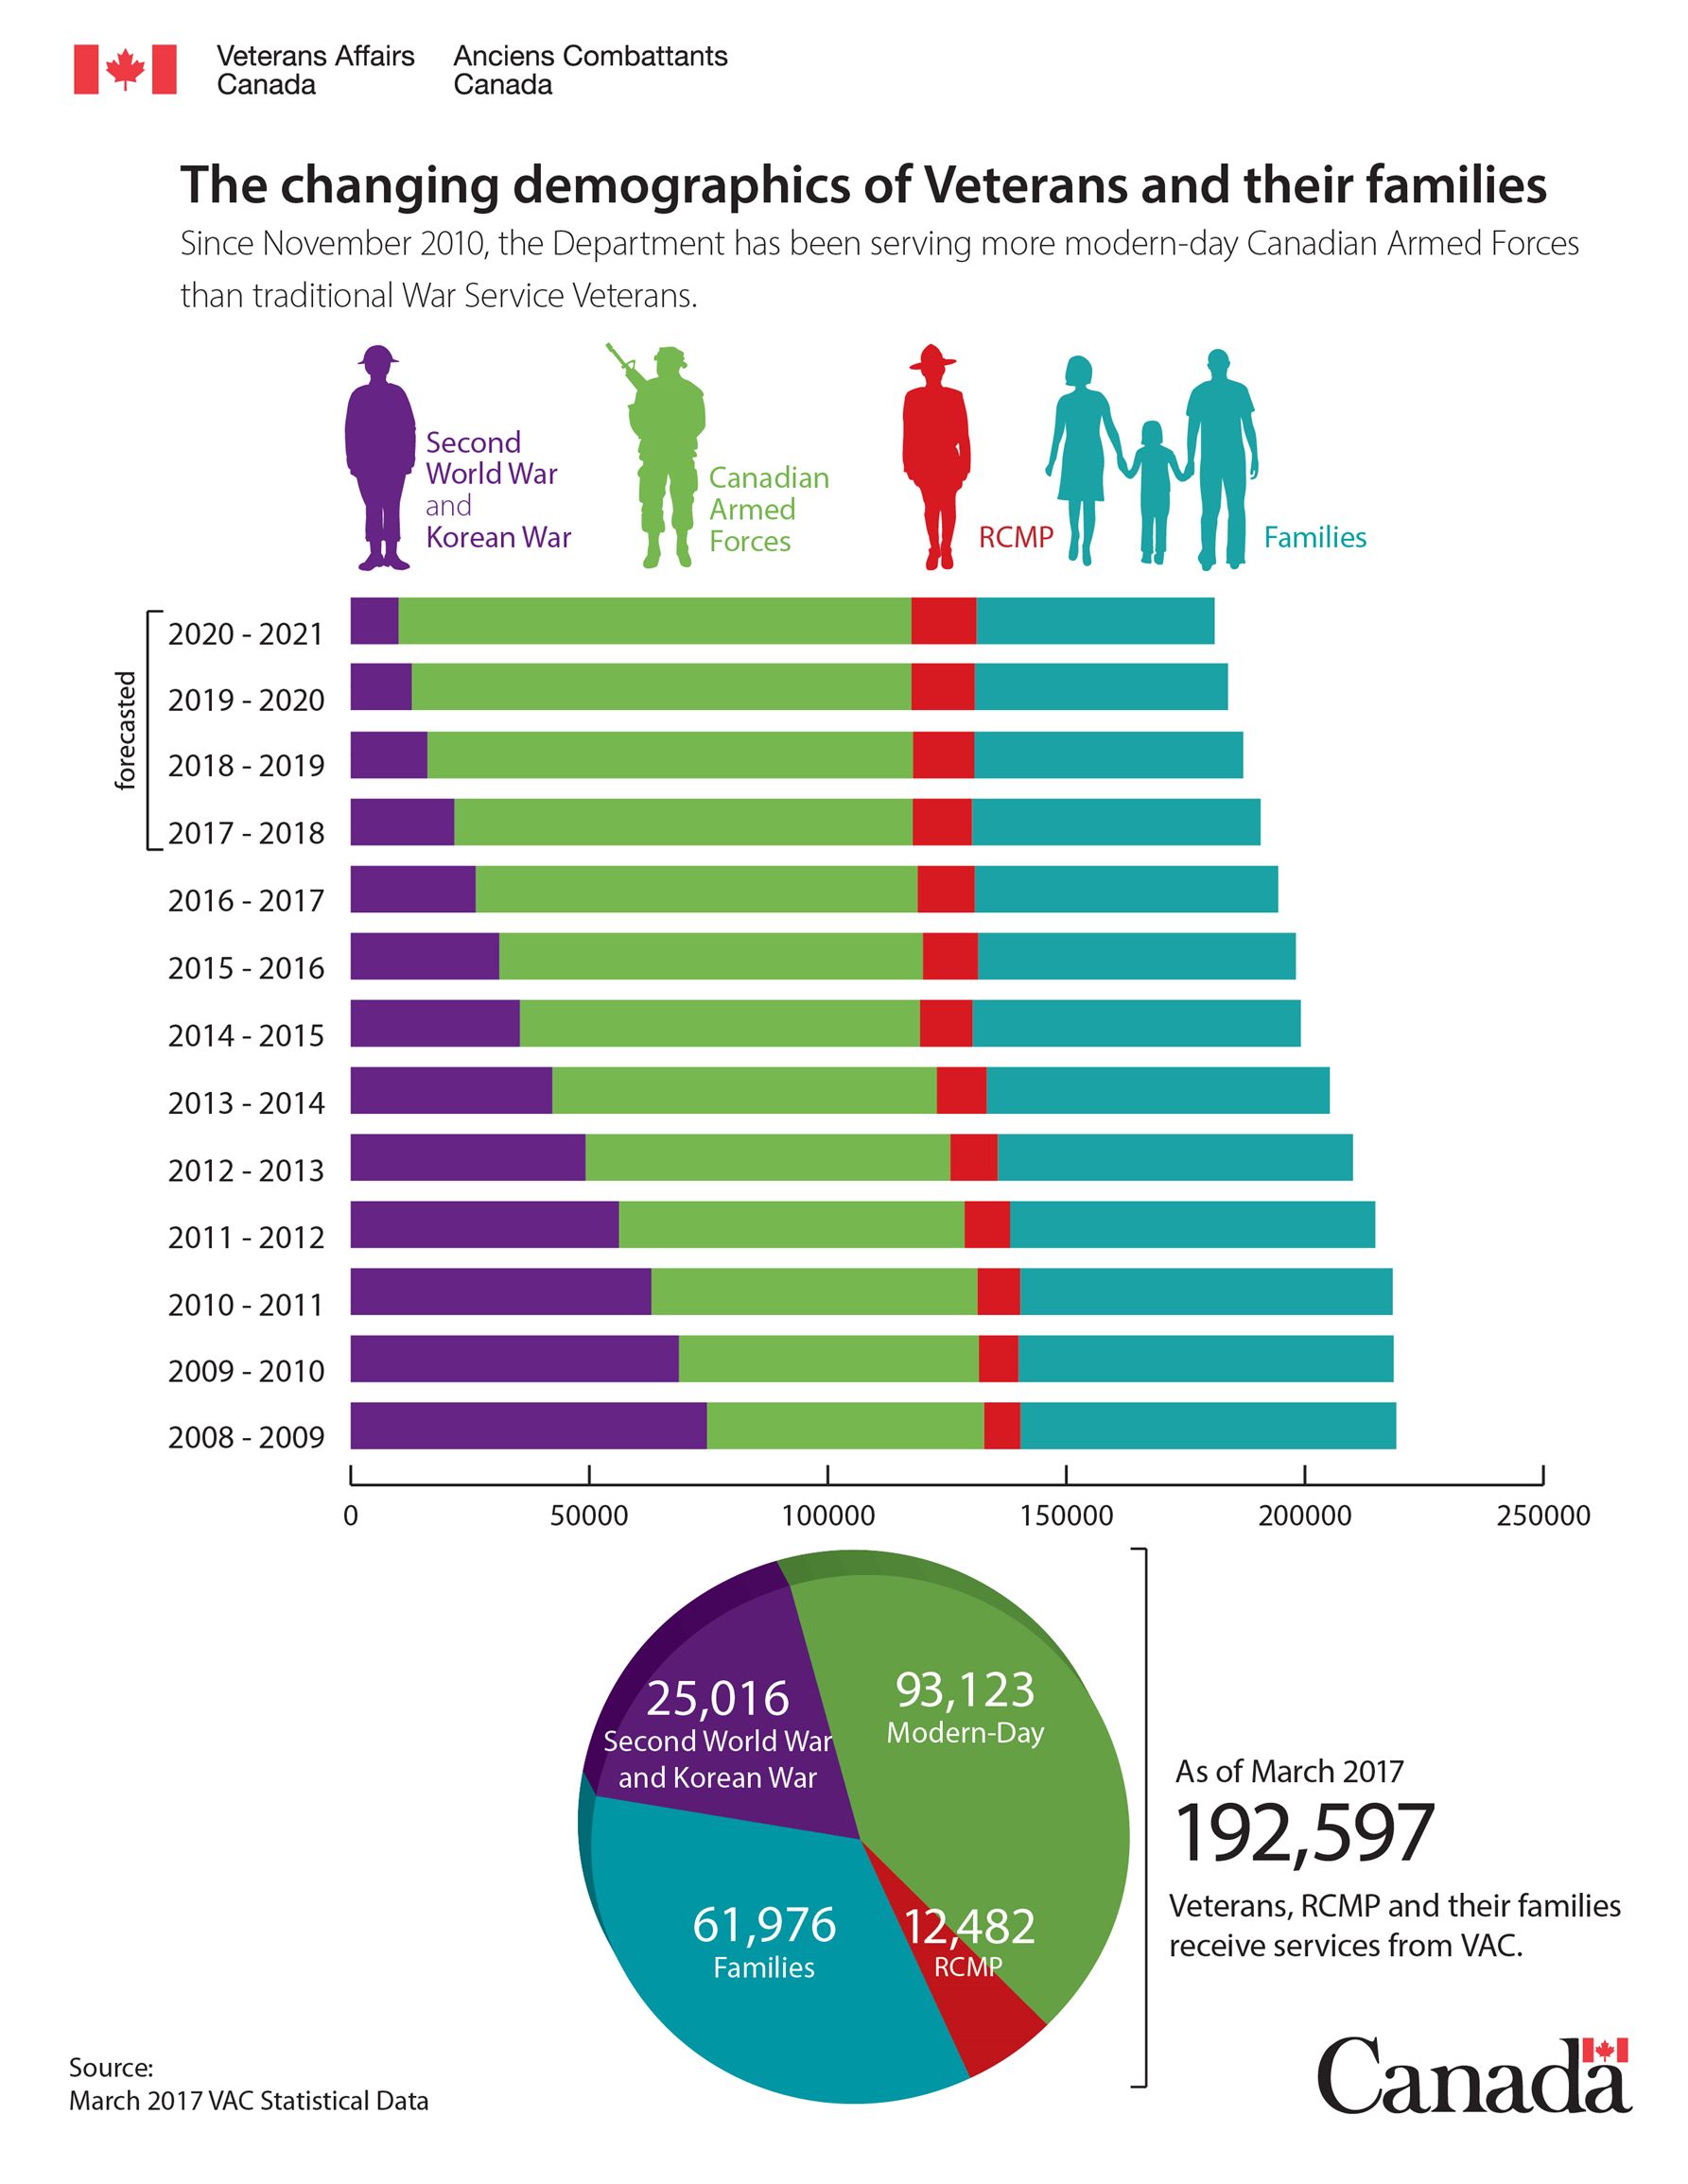 The changing demographics of Veterans and their families infographic